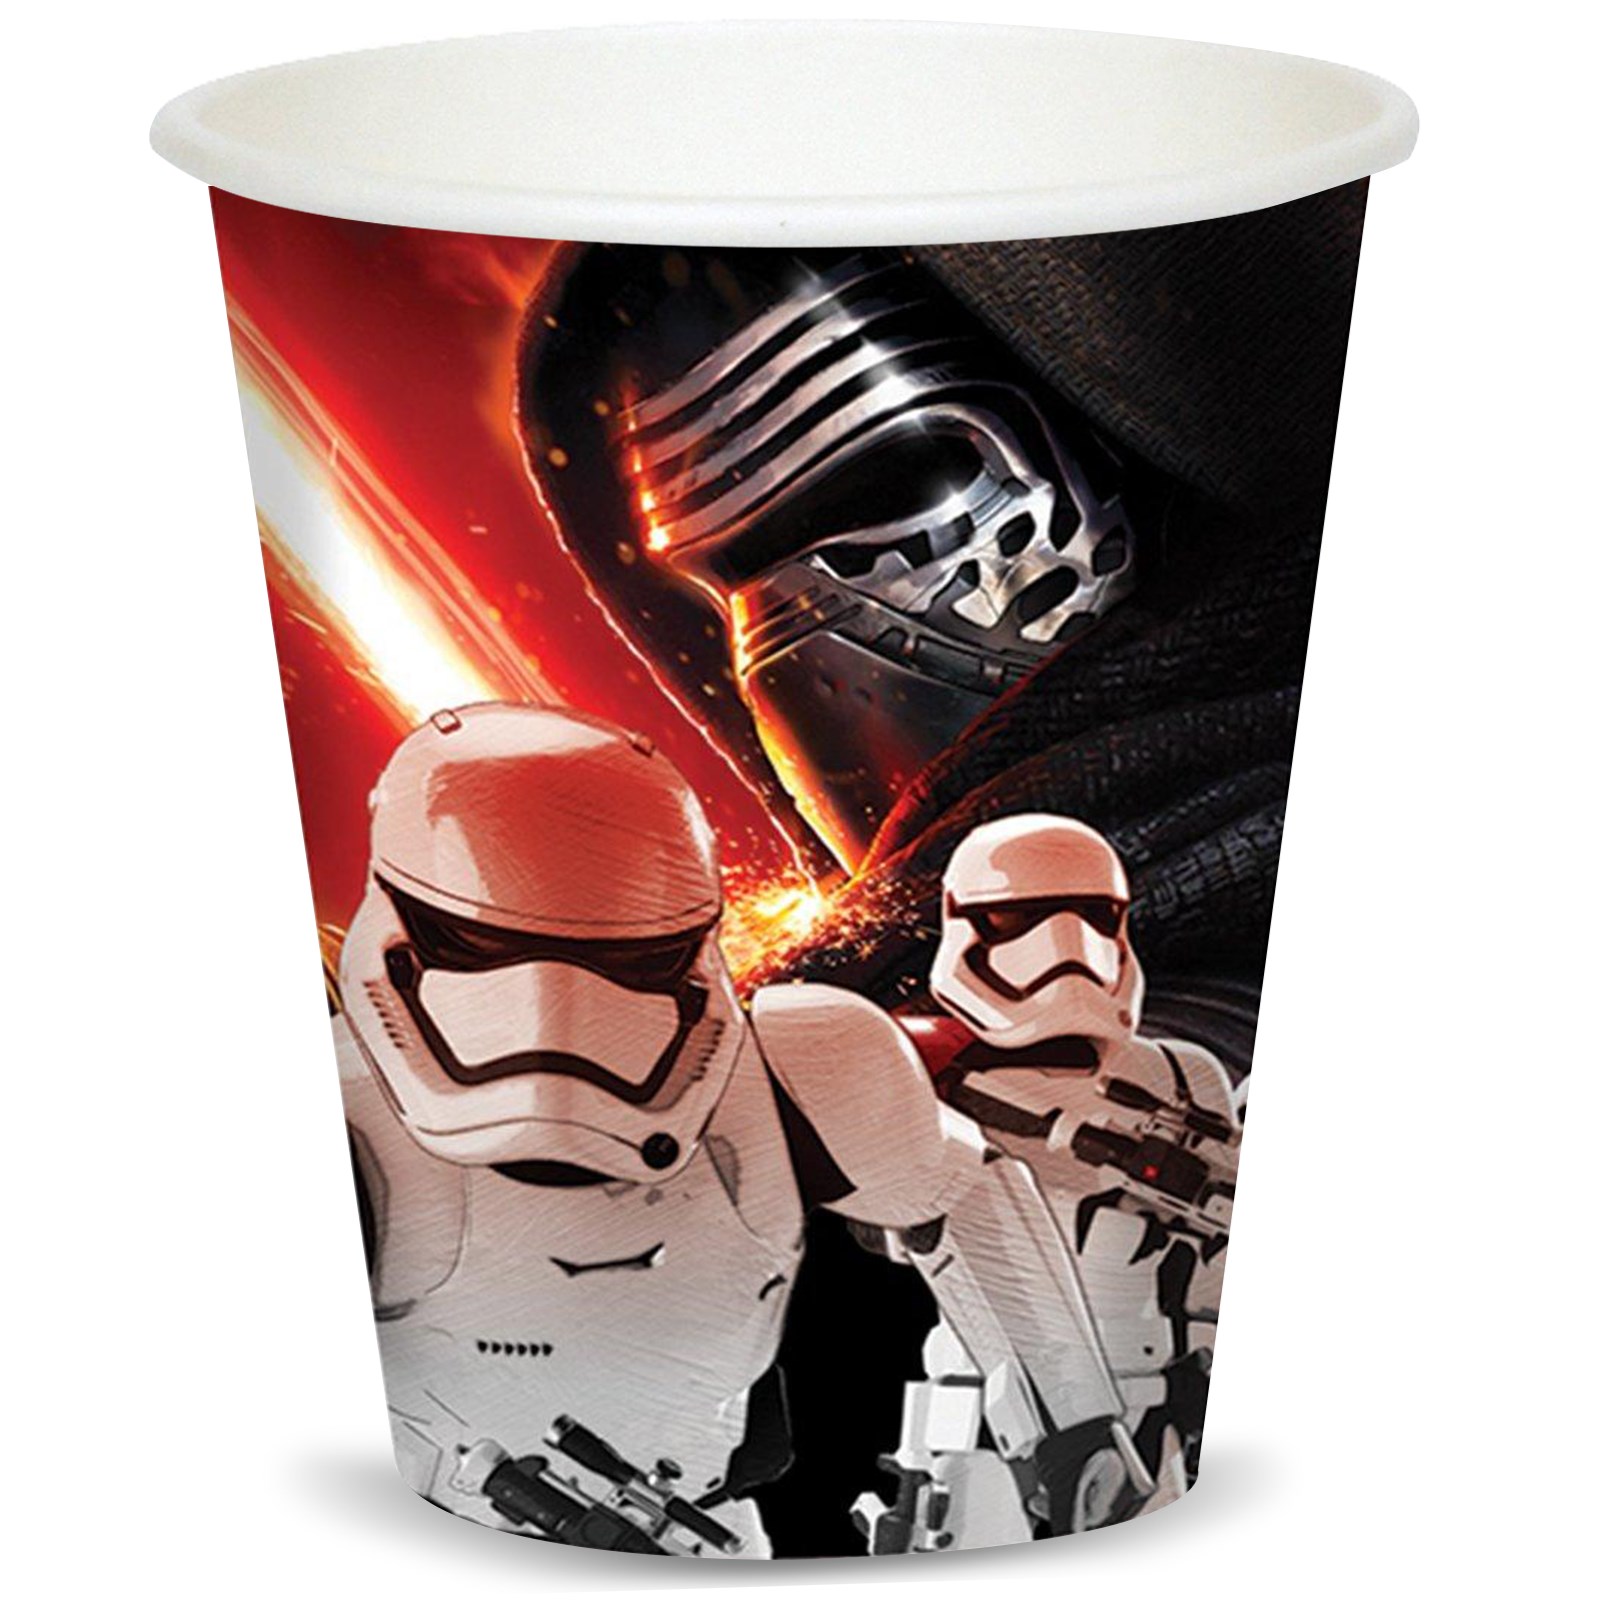 Star Wars 7 The Force Awakens 9 oz. Paper Cups